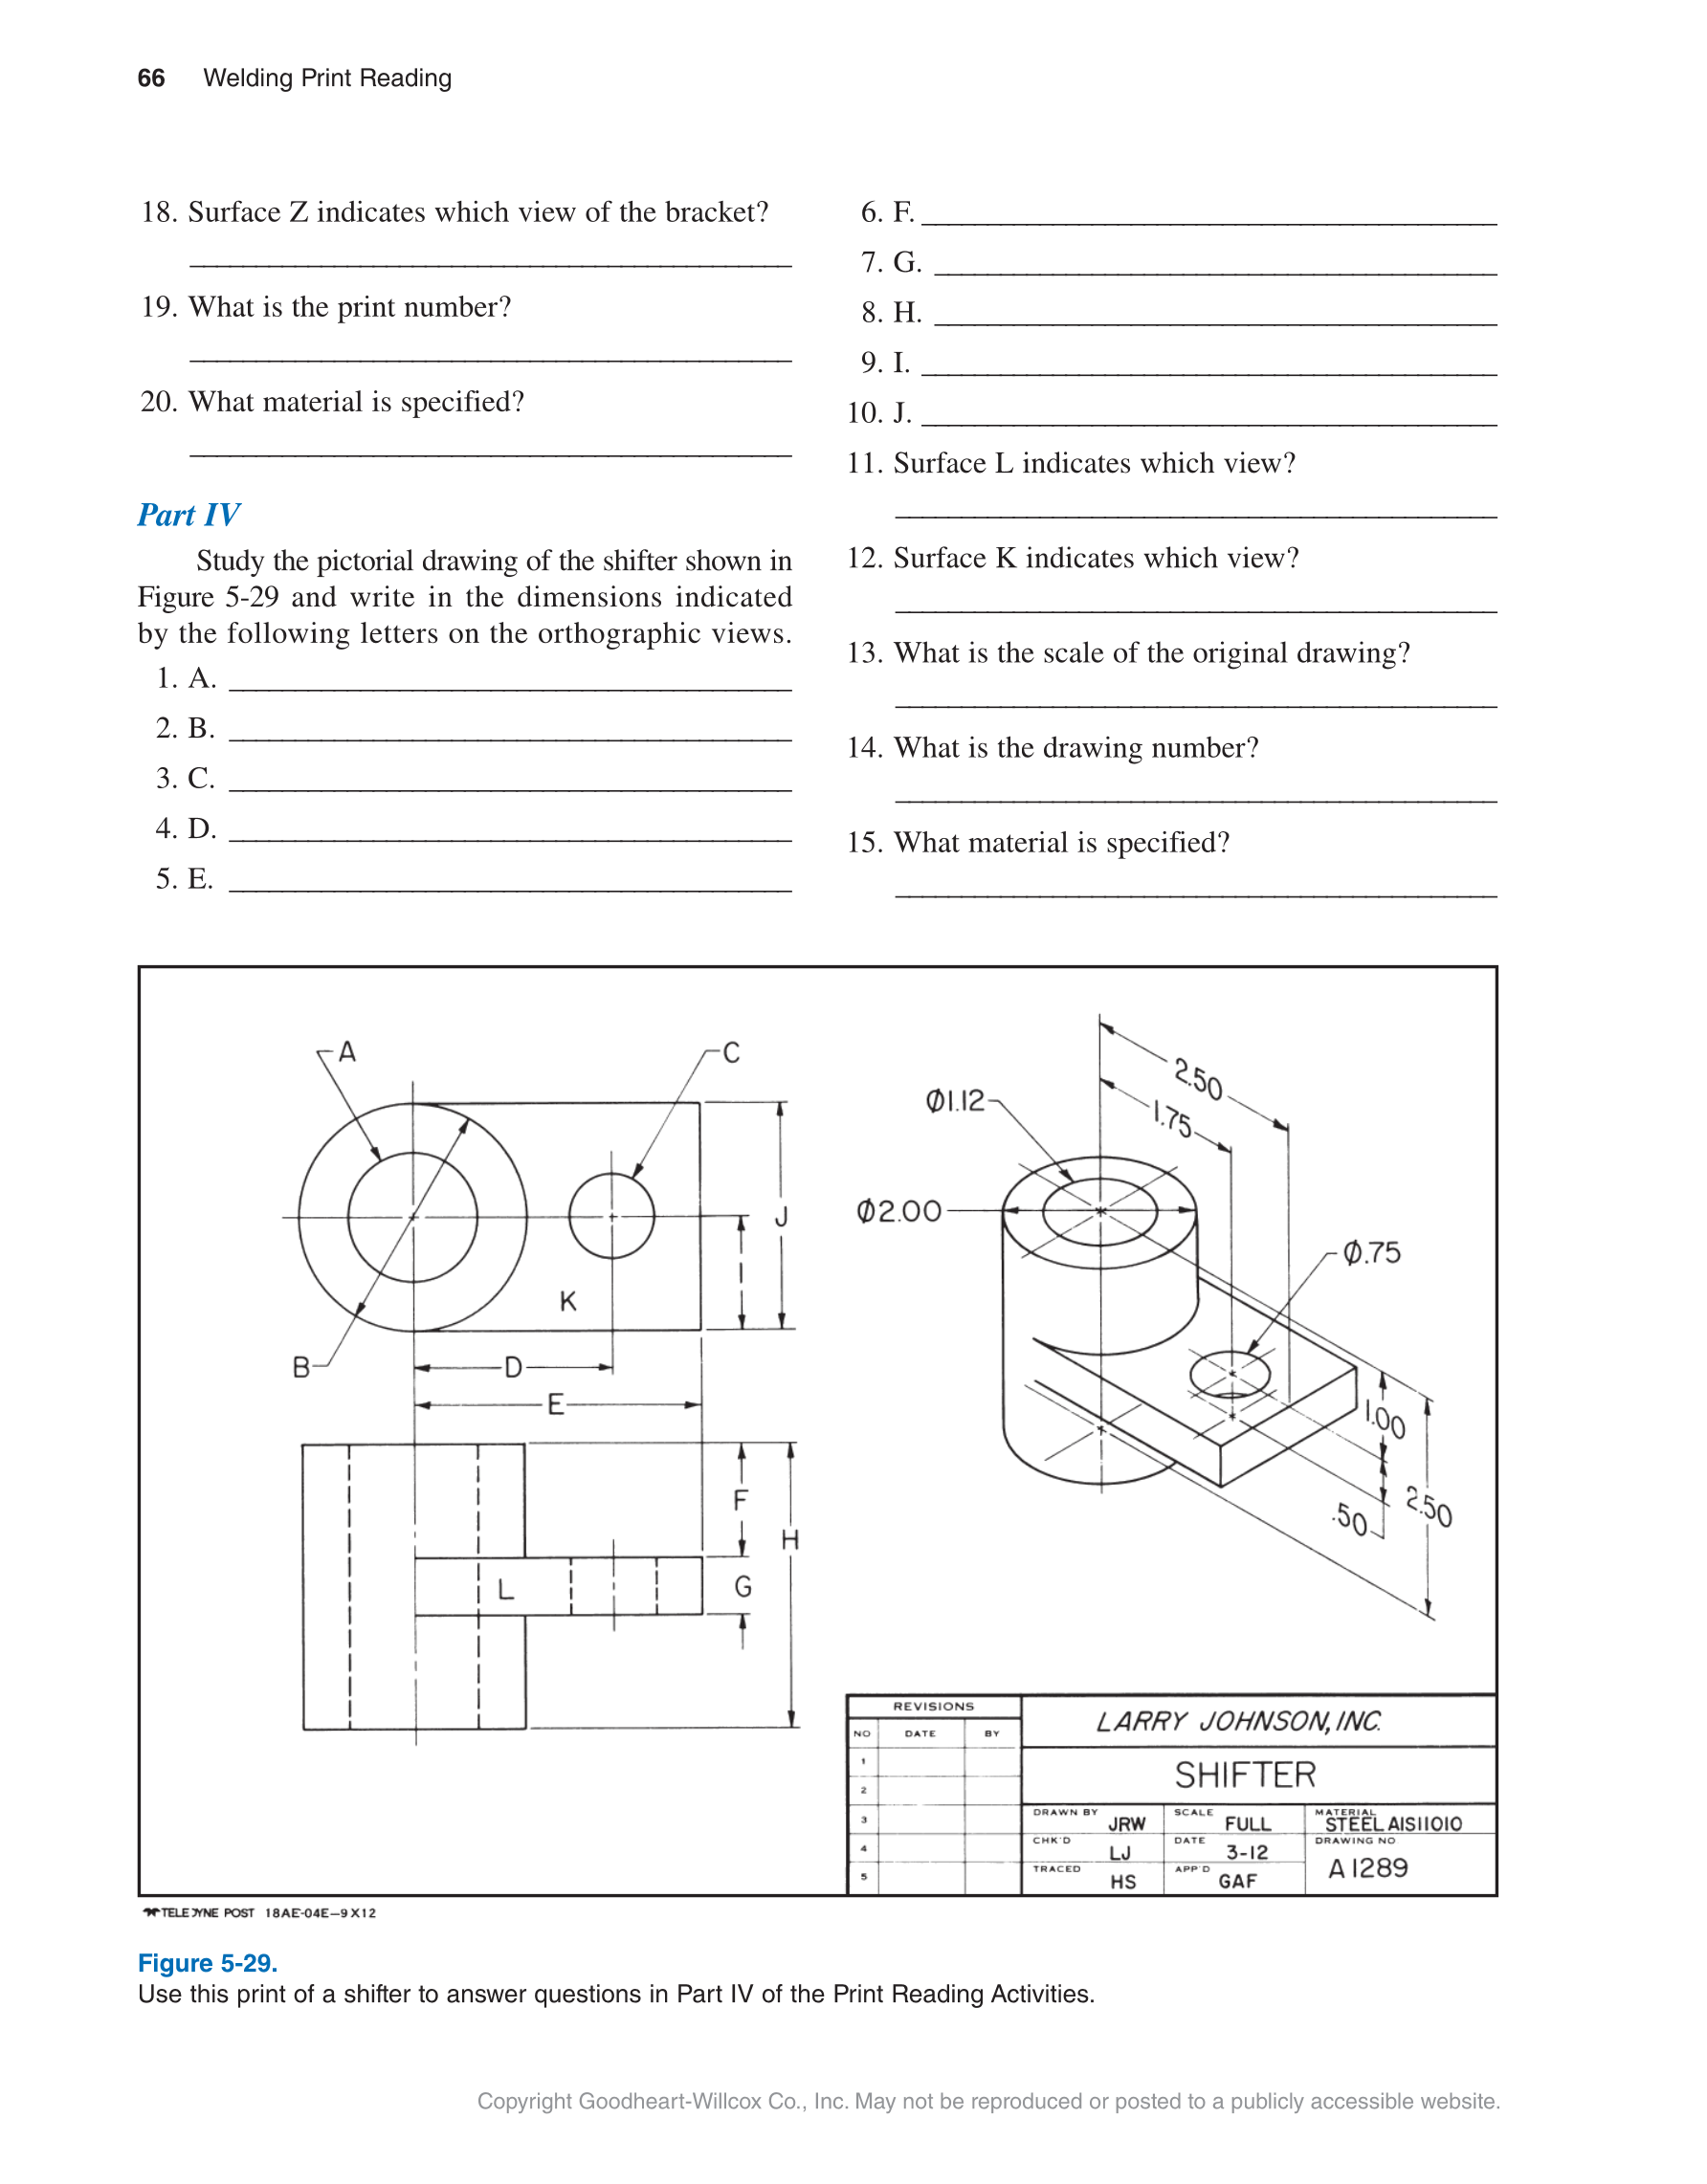 Printable Welding Print Reading, 7th Edition page 66